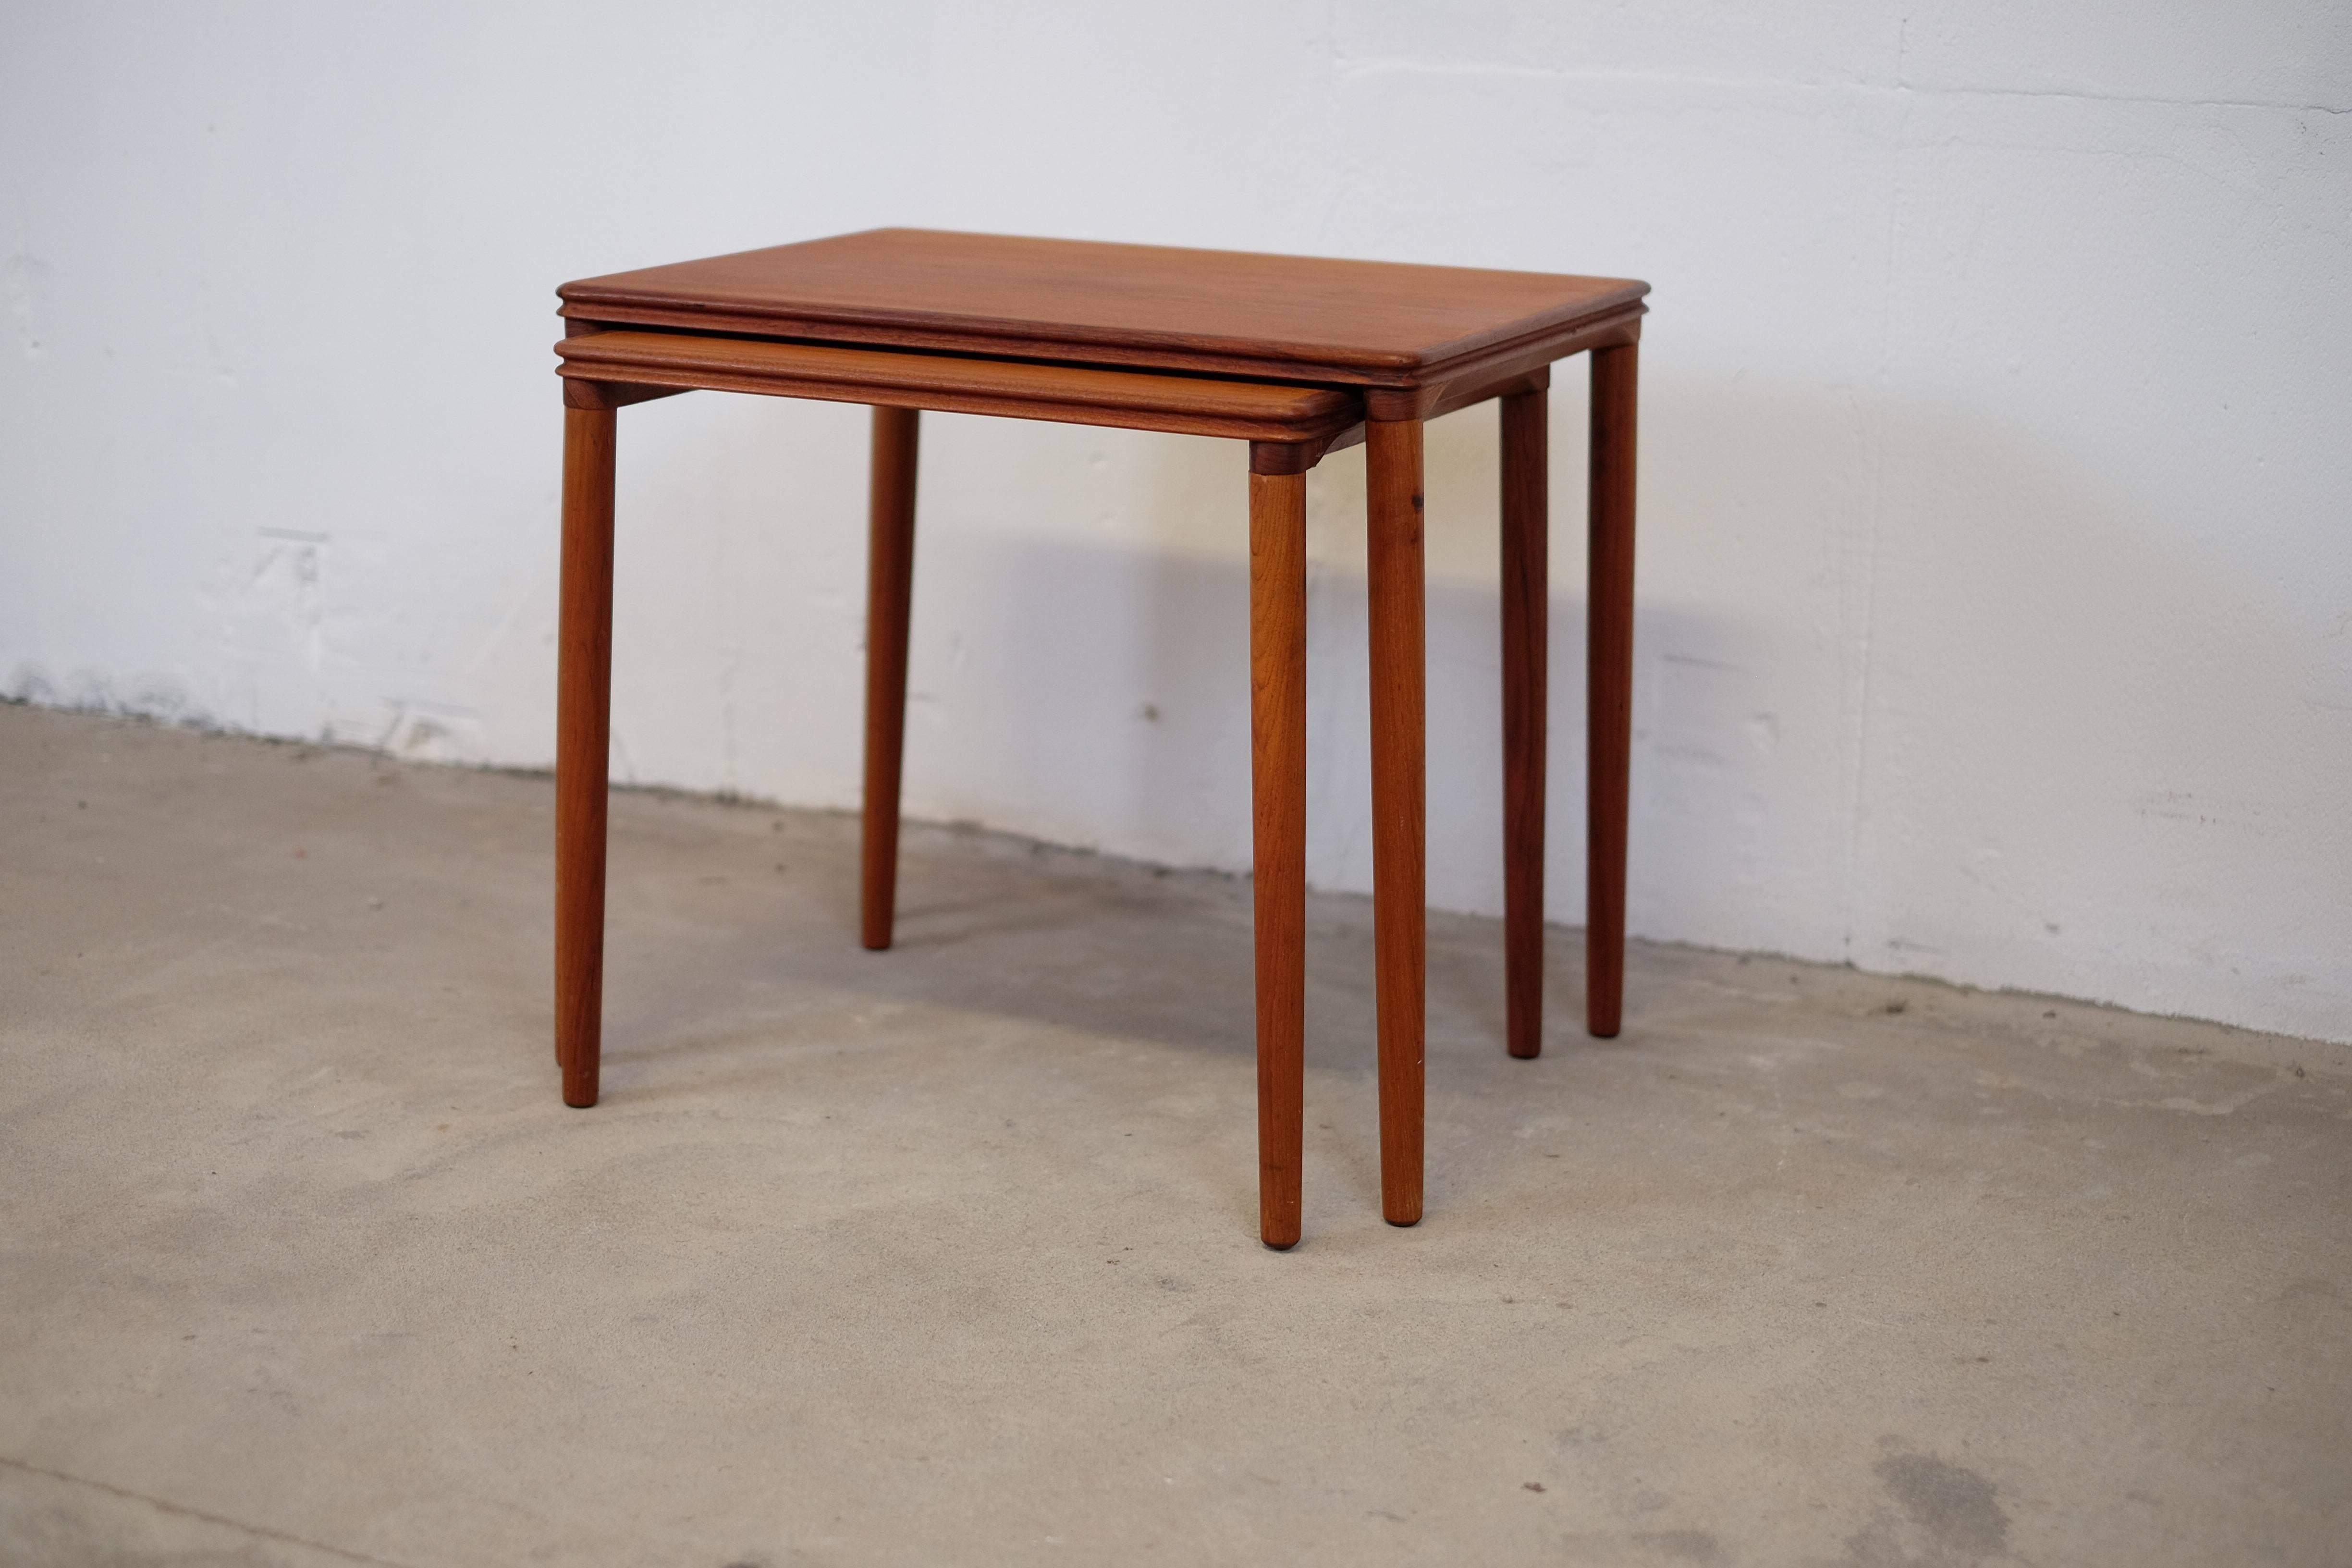 Pair of two nesting tables in teak wood with inclined legs and some beautiful details. 

Great Danish craftsmanship from the 1960s era. 

Both of the tables is in good condition.

Small table: H: 46cm B: 47.5cm D: 40cm 
Feel free to ask if you got